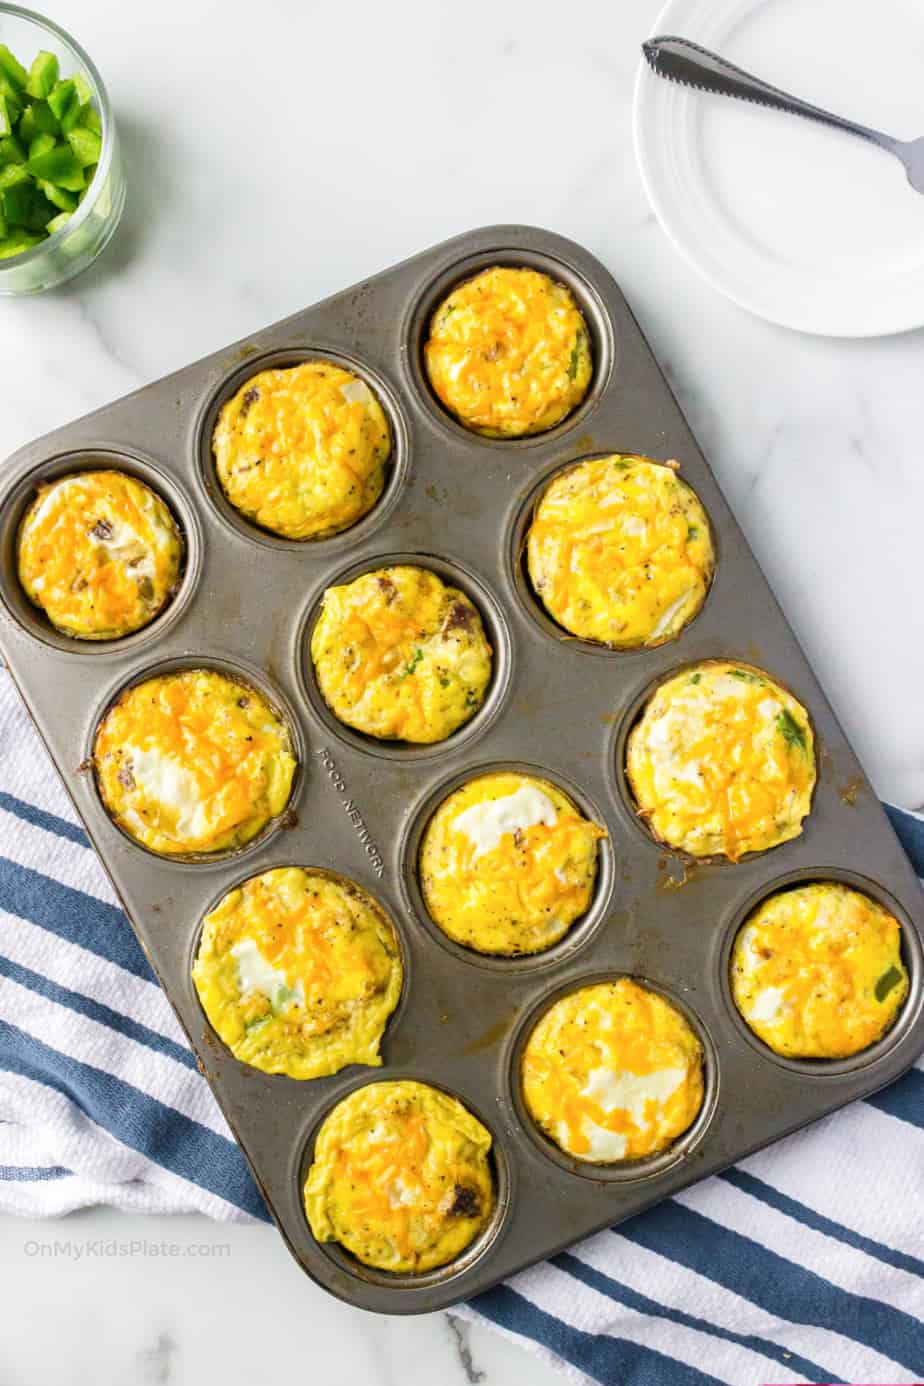 Overhead view of egg muffins baked in the muffin pan